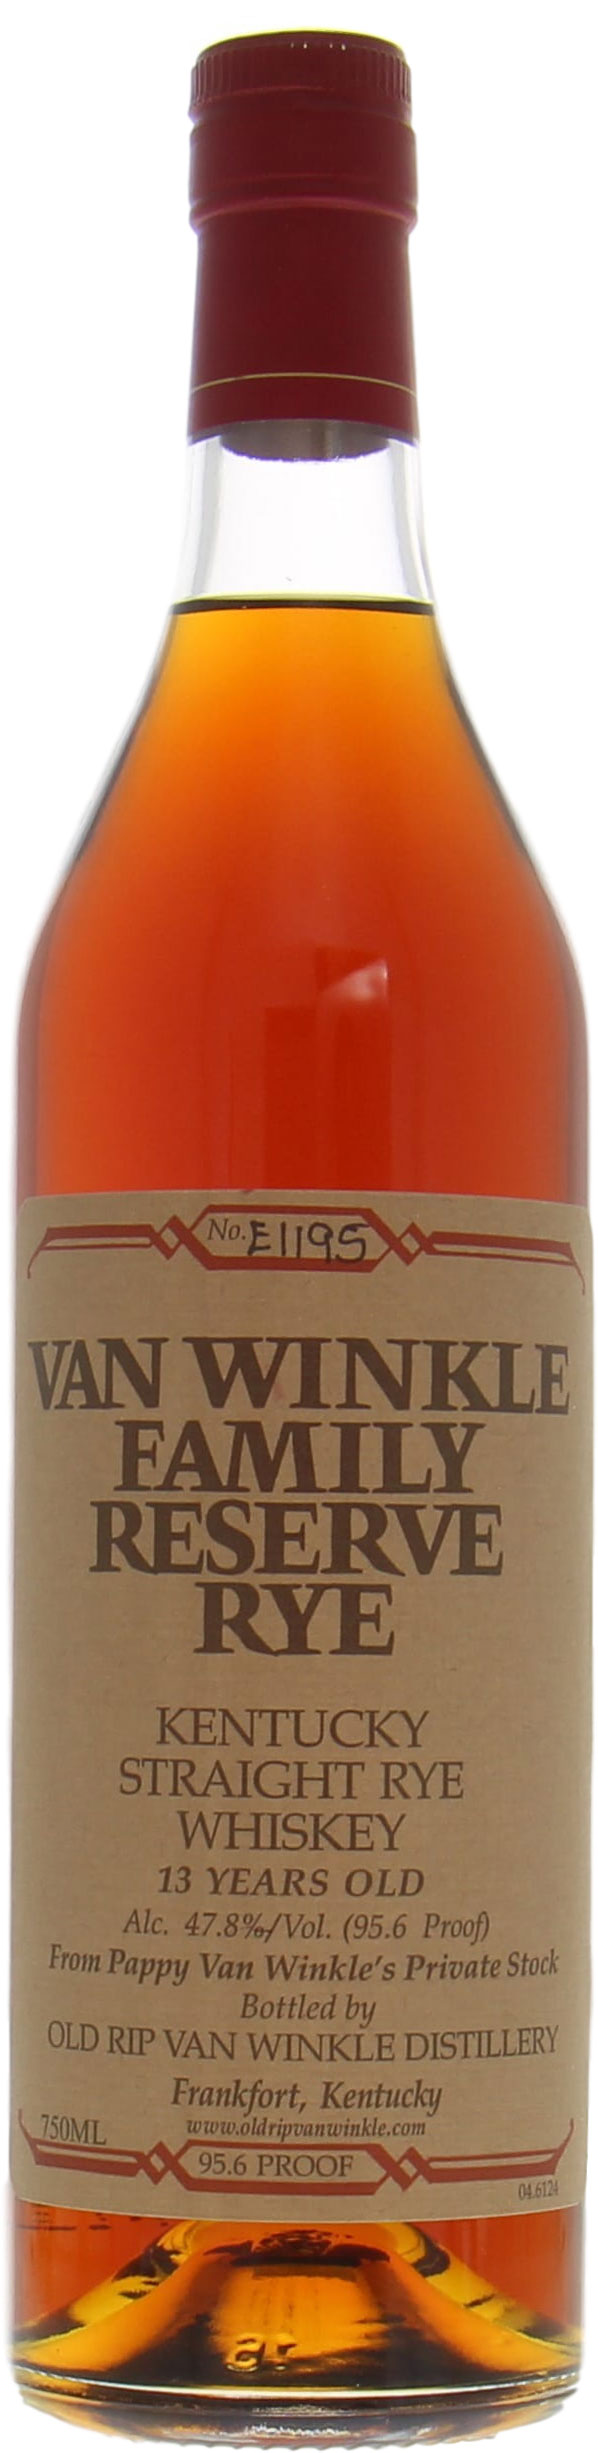 Van Winkle - Rye 13 Years Old Family Reserve No. E1195 95.6 Proof 47.8% NV Perfect